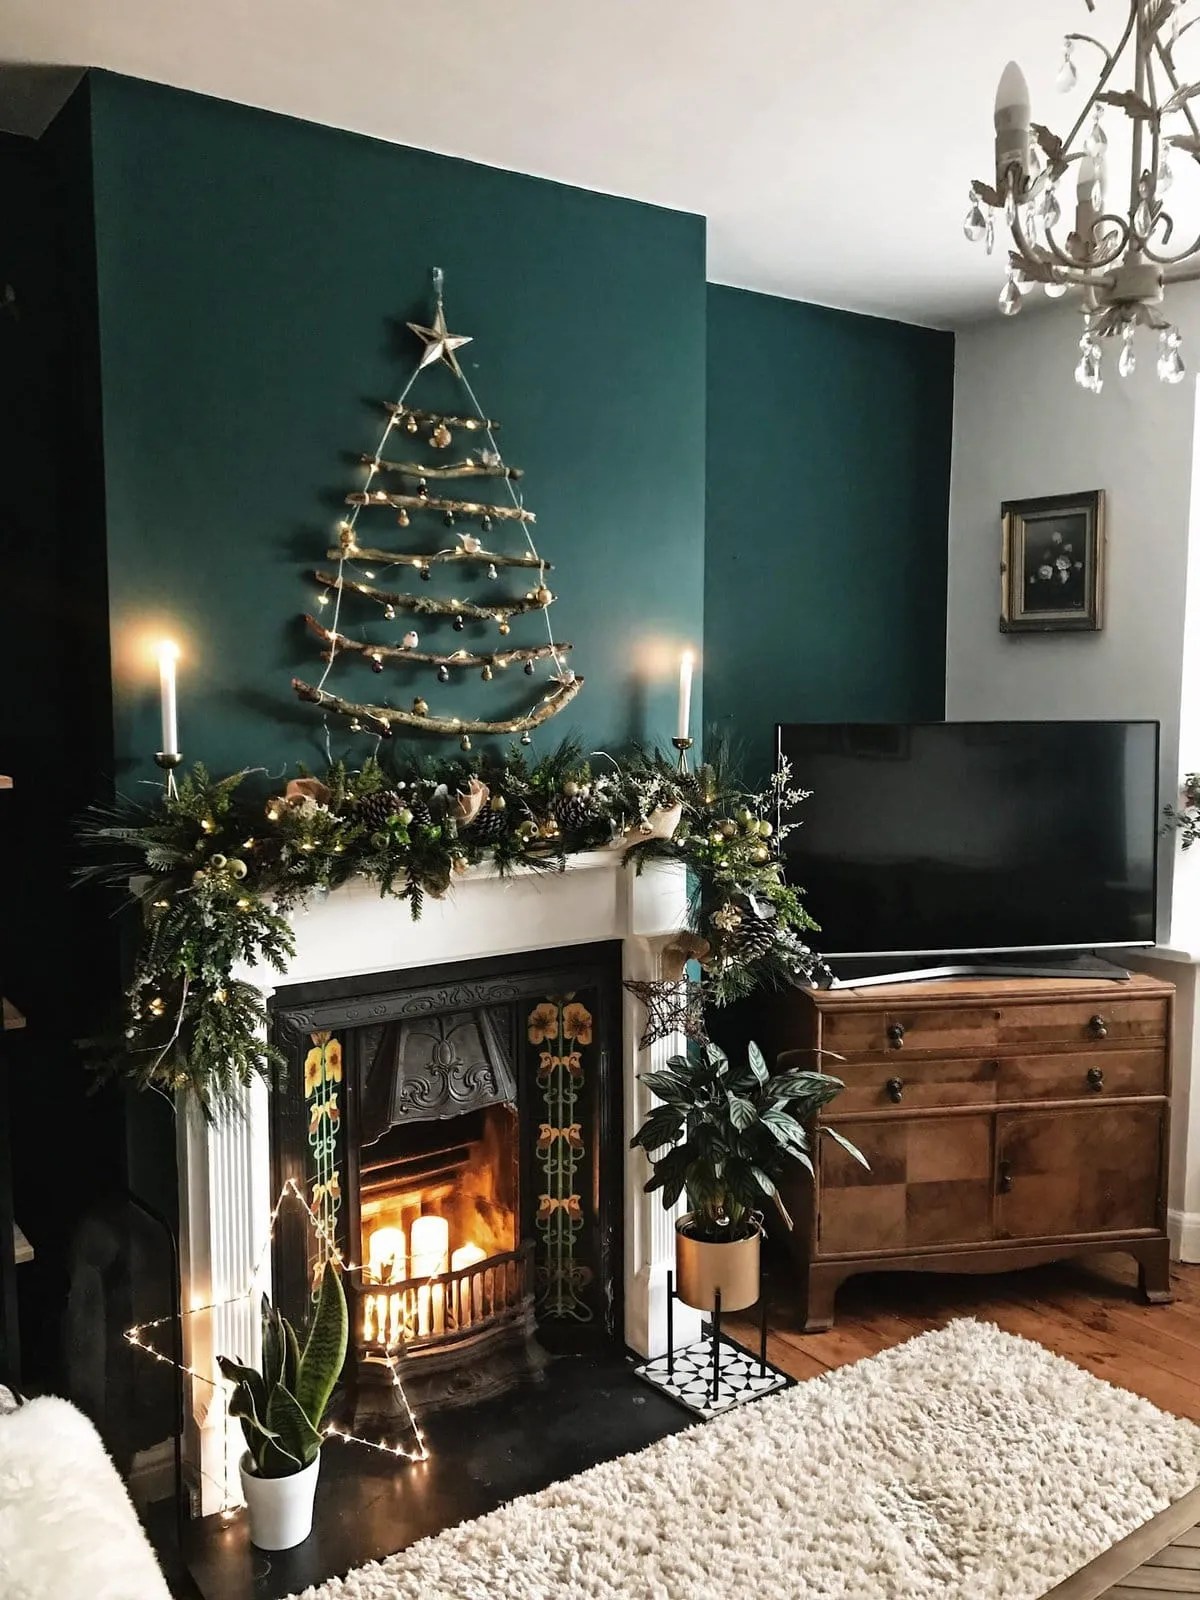 Twig Christmas Tree – How To Create an Eco Friendly Decoration